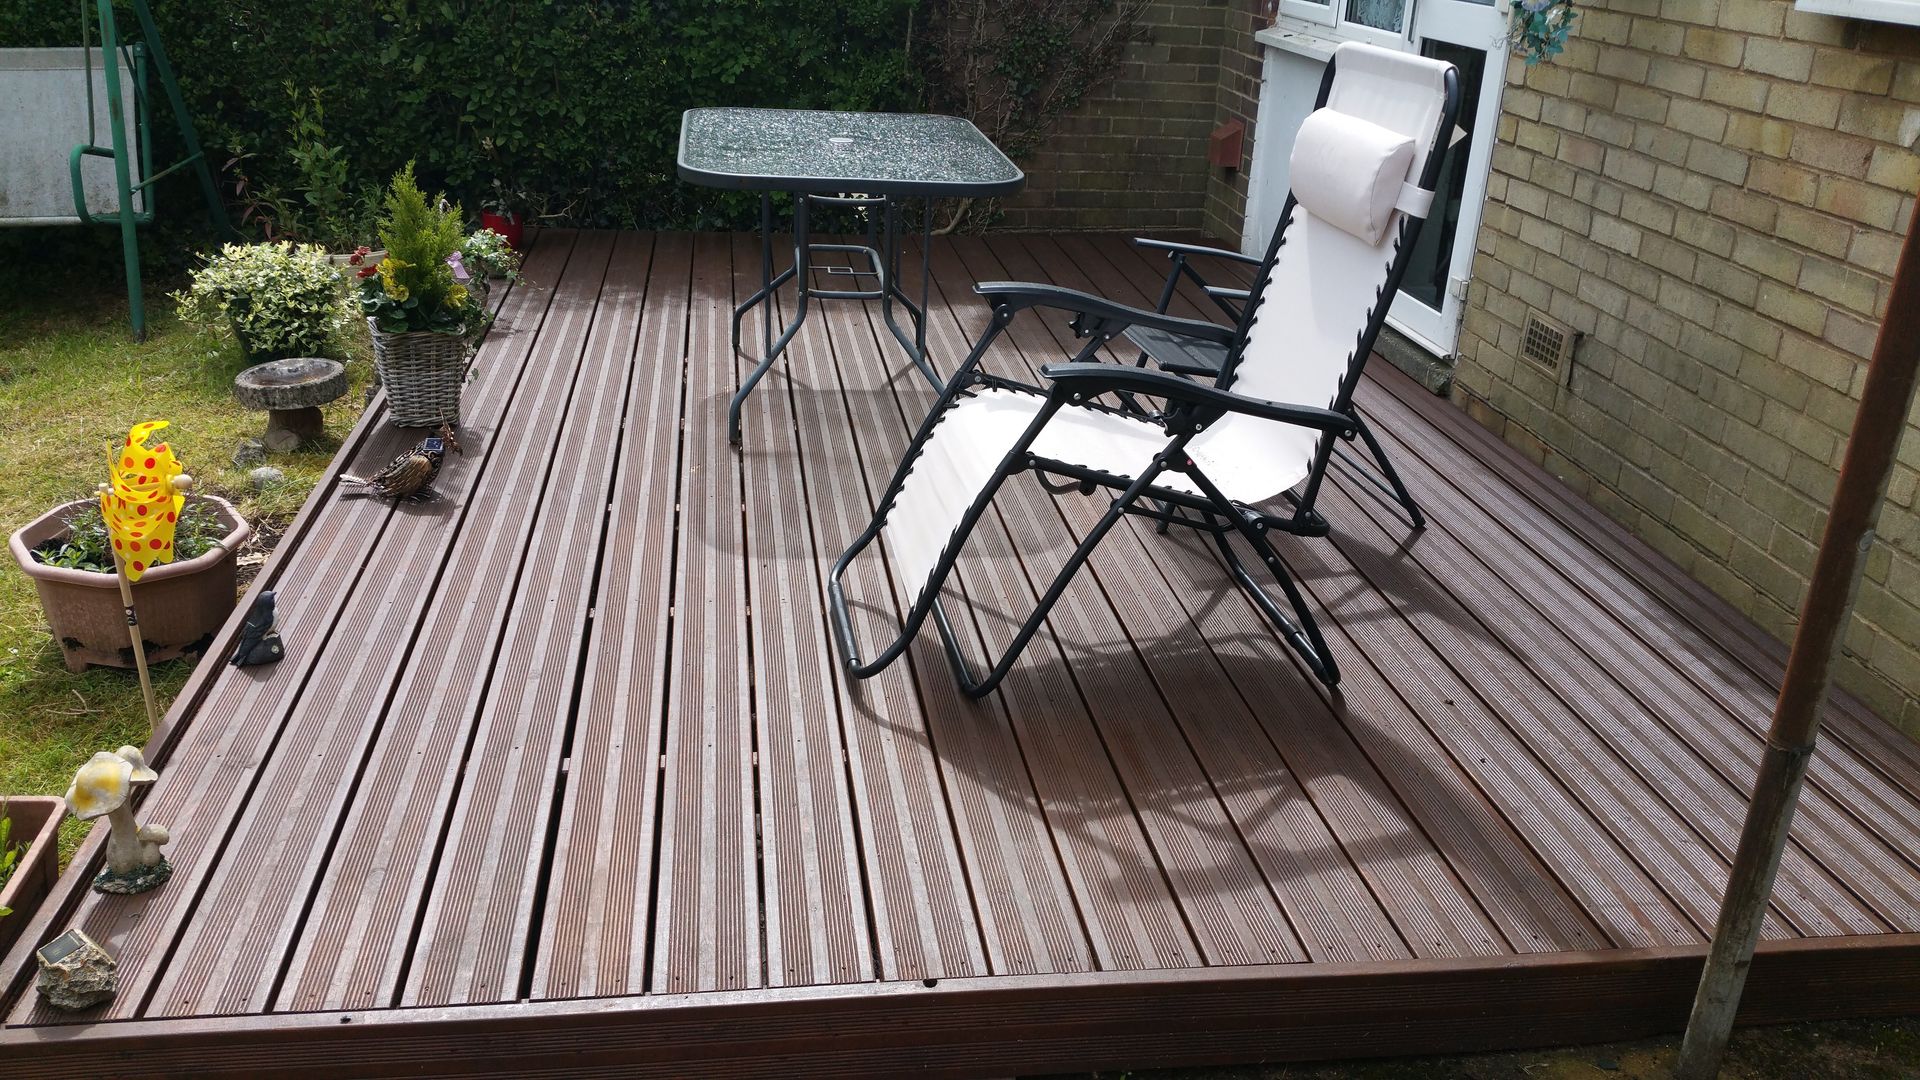 Anti Slip Wood Stain For Decking Board Construction In The Garden